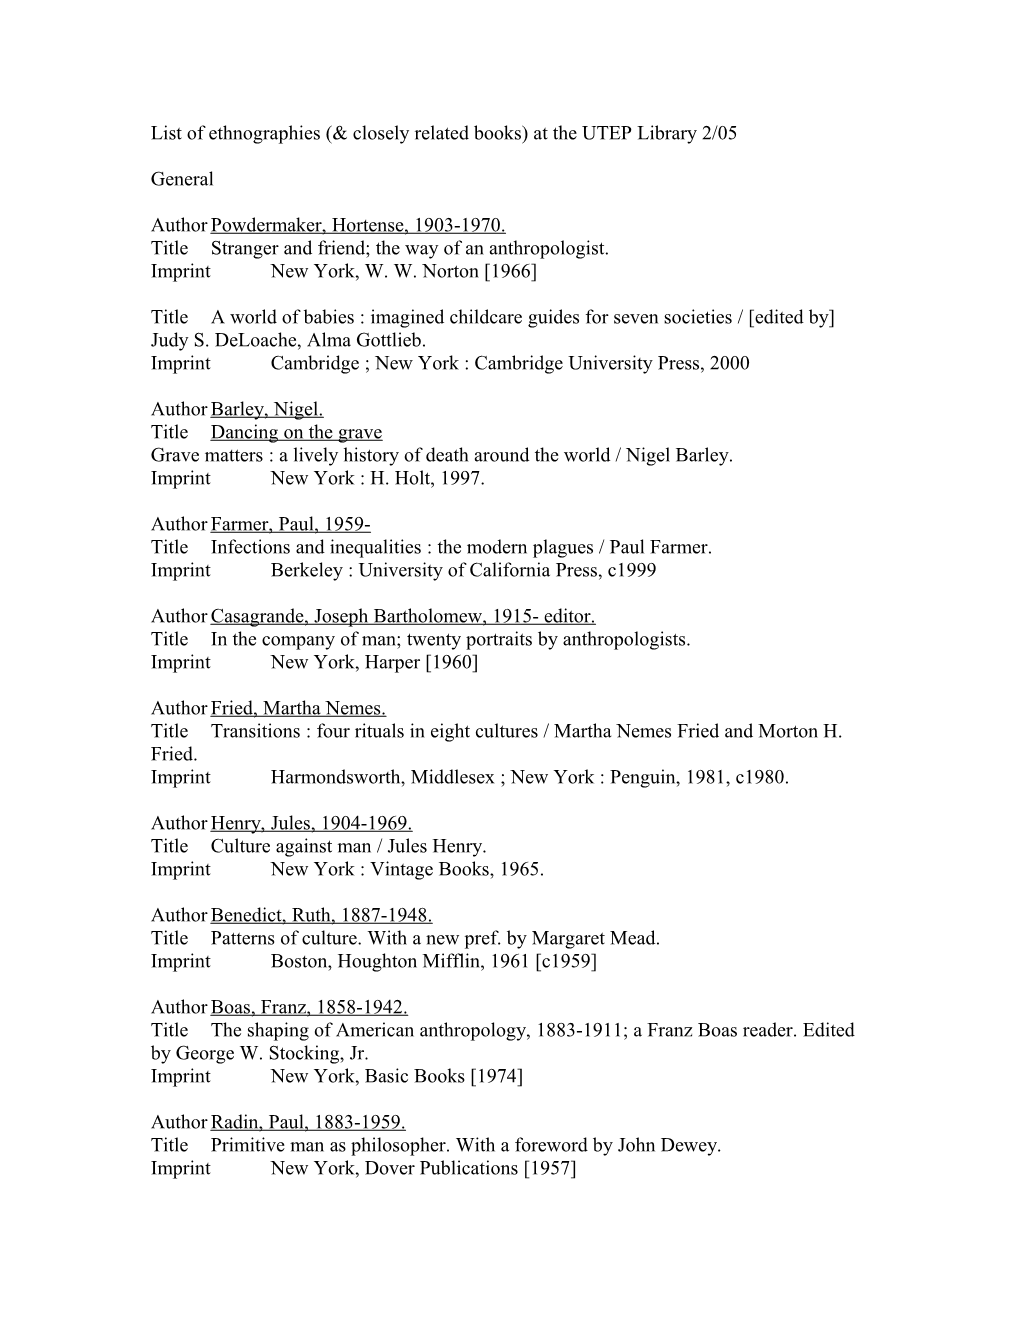 List of Ethnographies at the UTEP Library 2/05